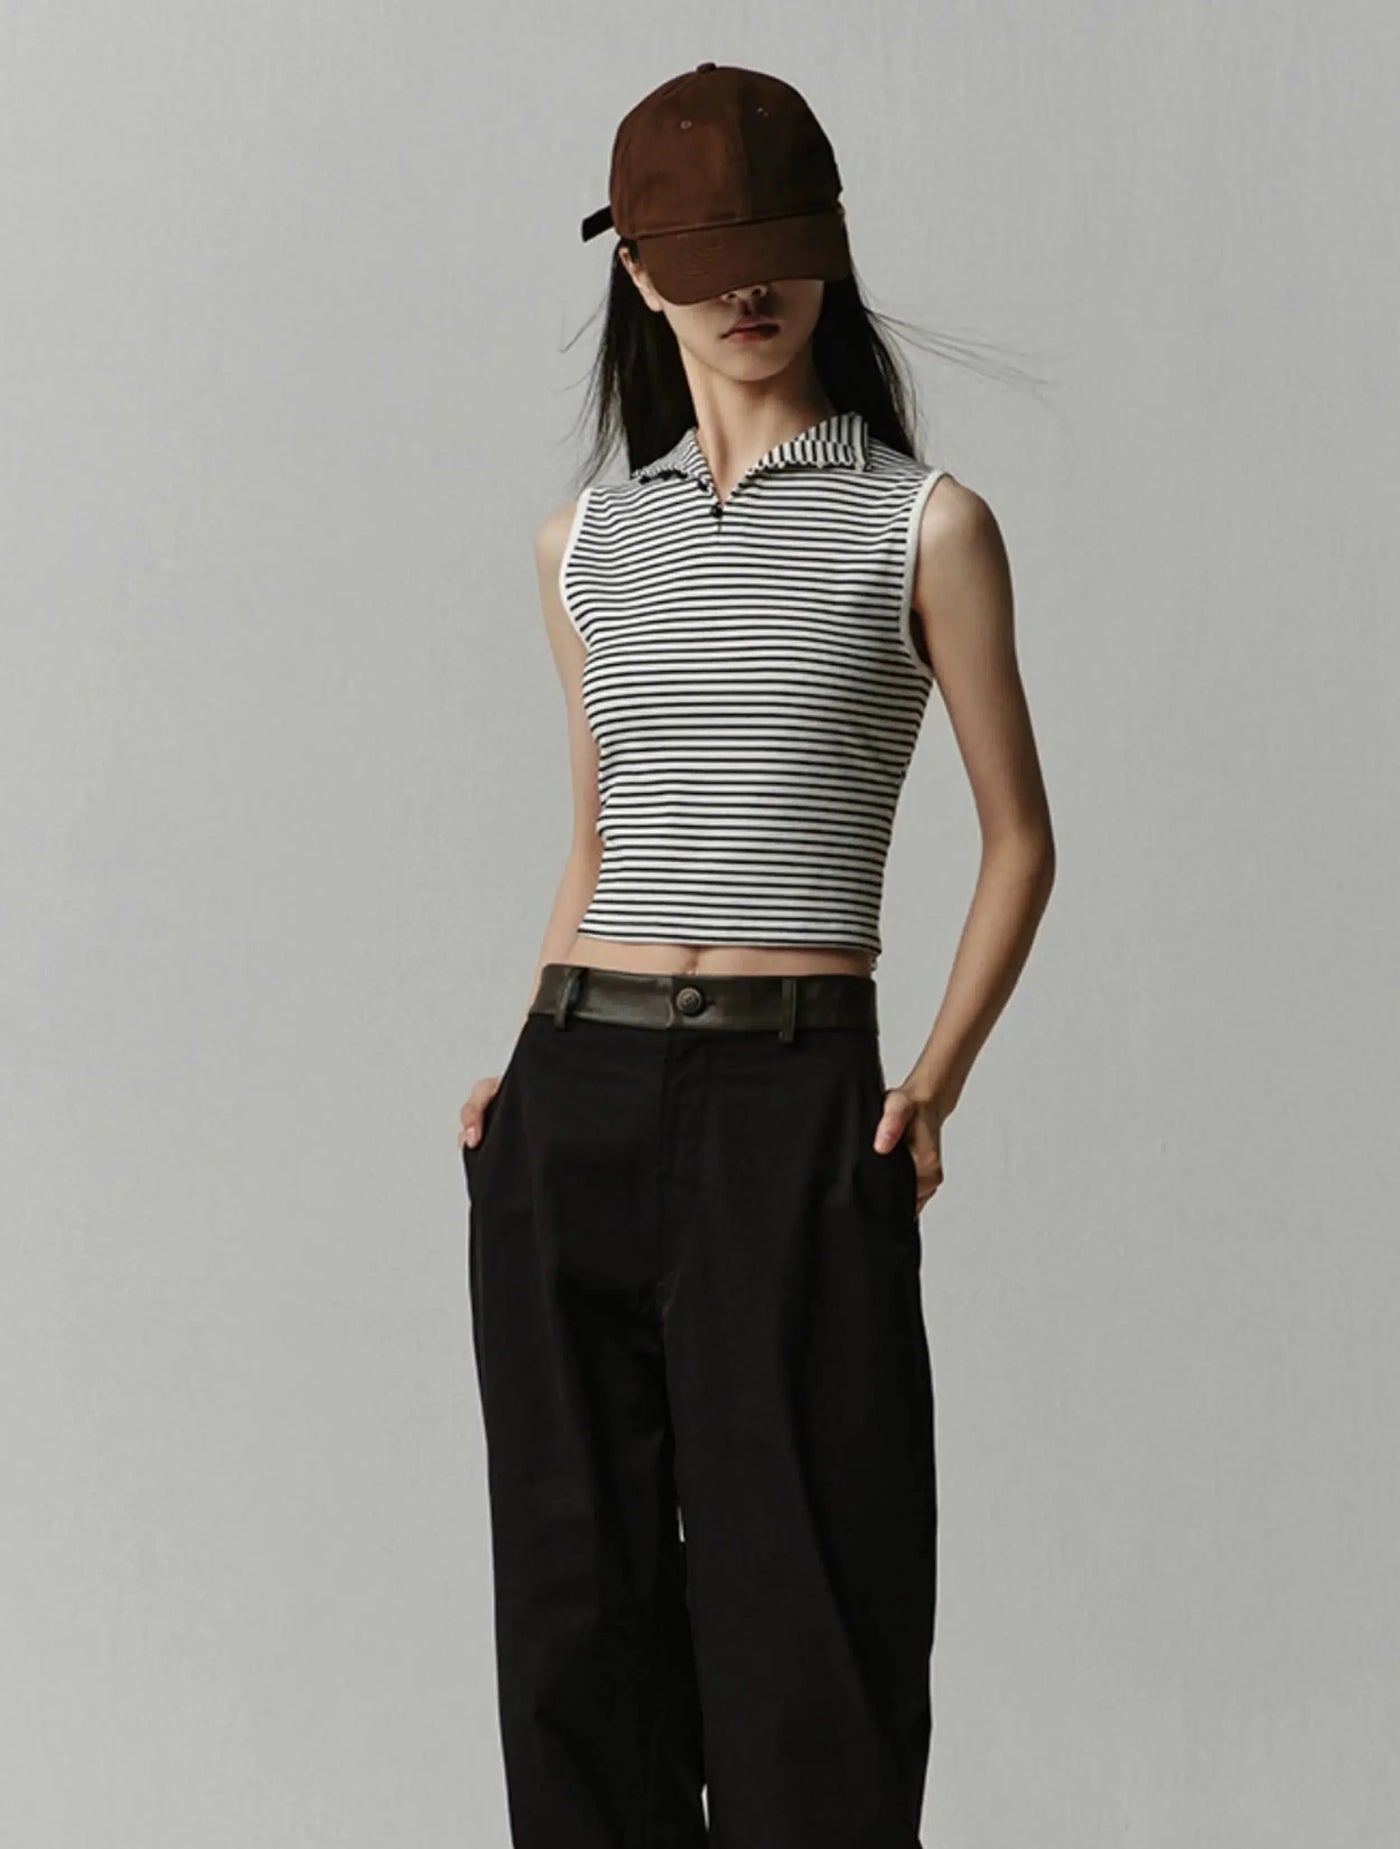 Essential Slim Fit Cropped Vest Korean Street Fashion Vest By Opicloth Shop Online at OH Vault